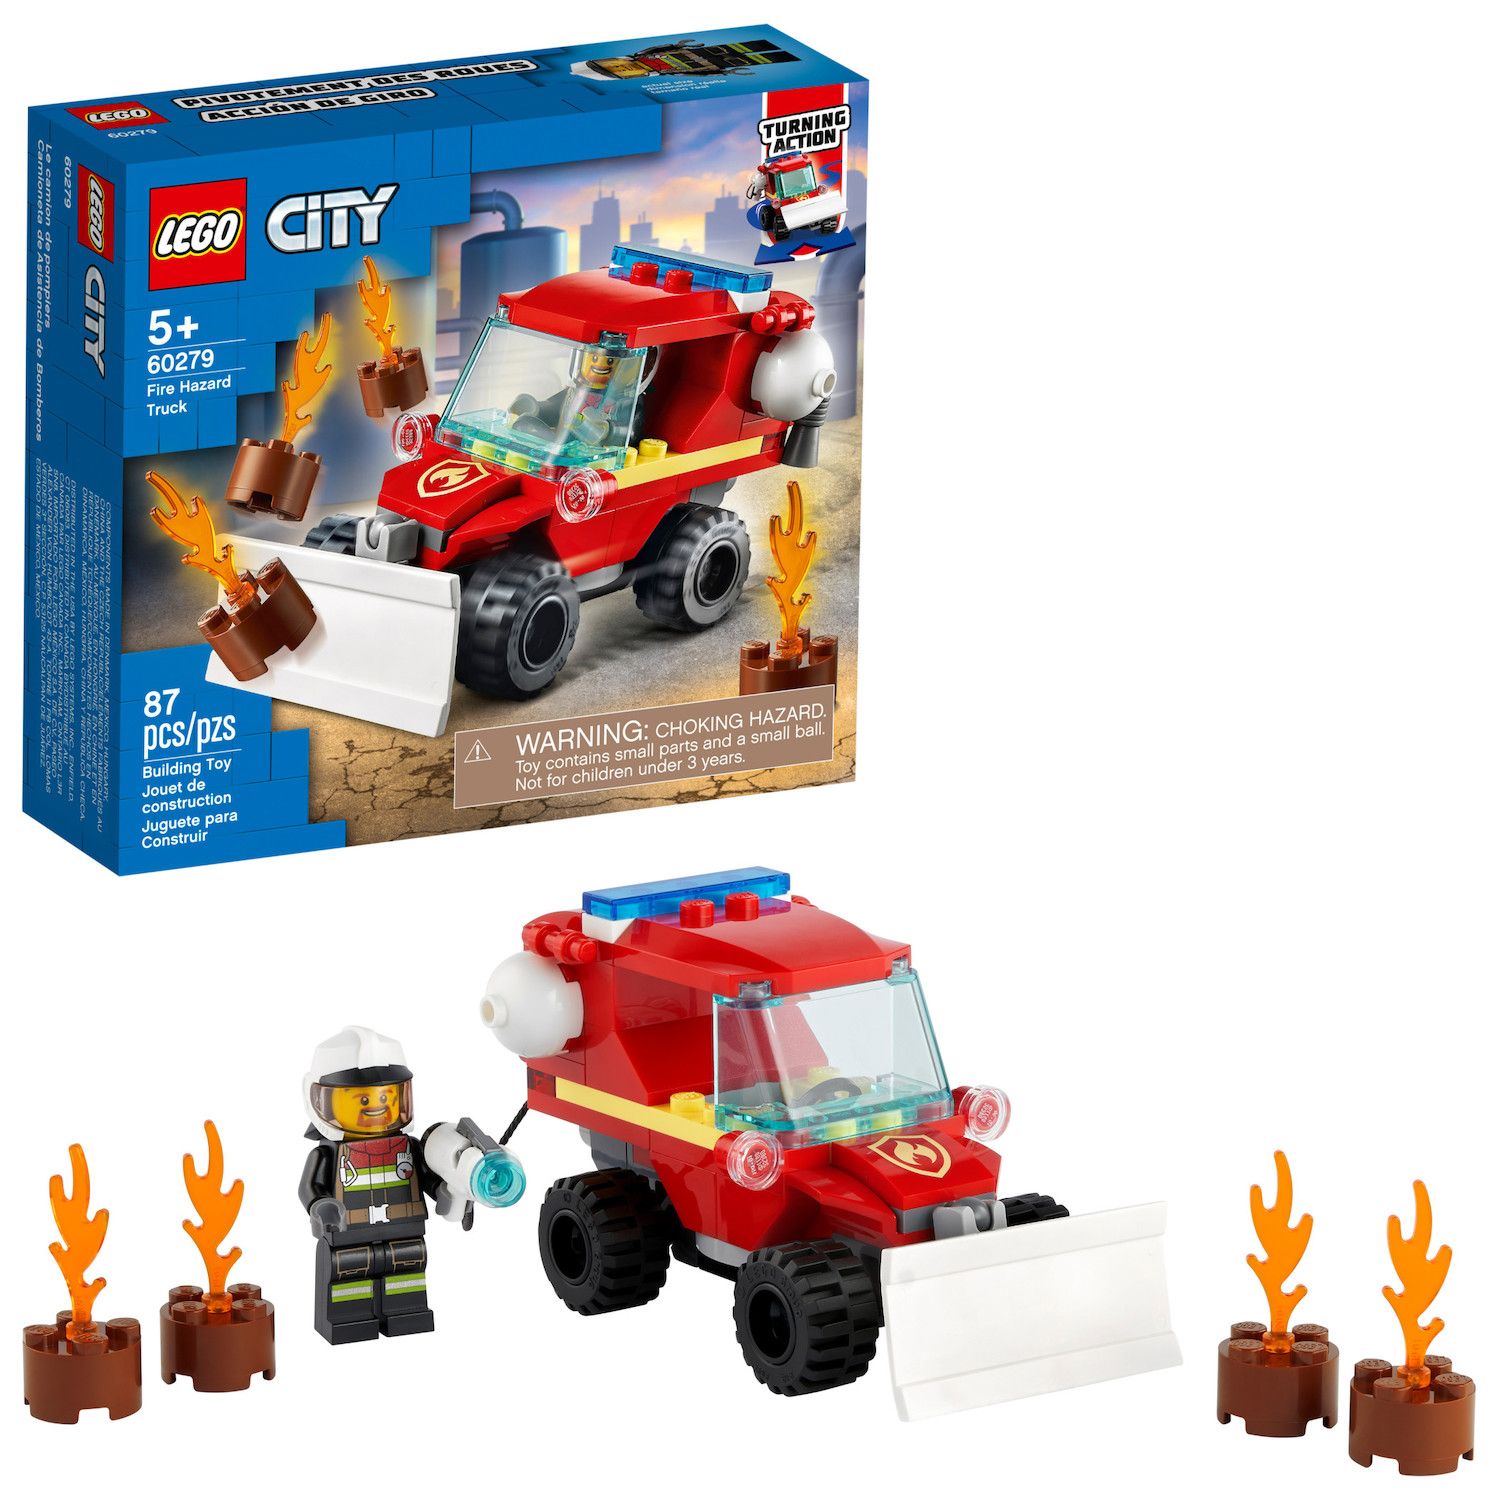 Image for LEGO City Fire Hazard Truck 60279 Set (87 Pieces) at Kohl's.